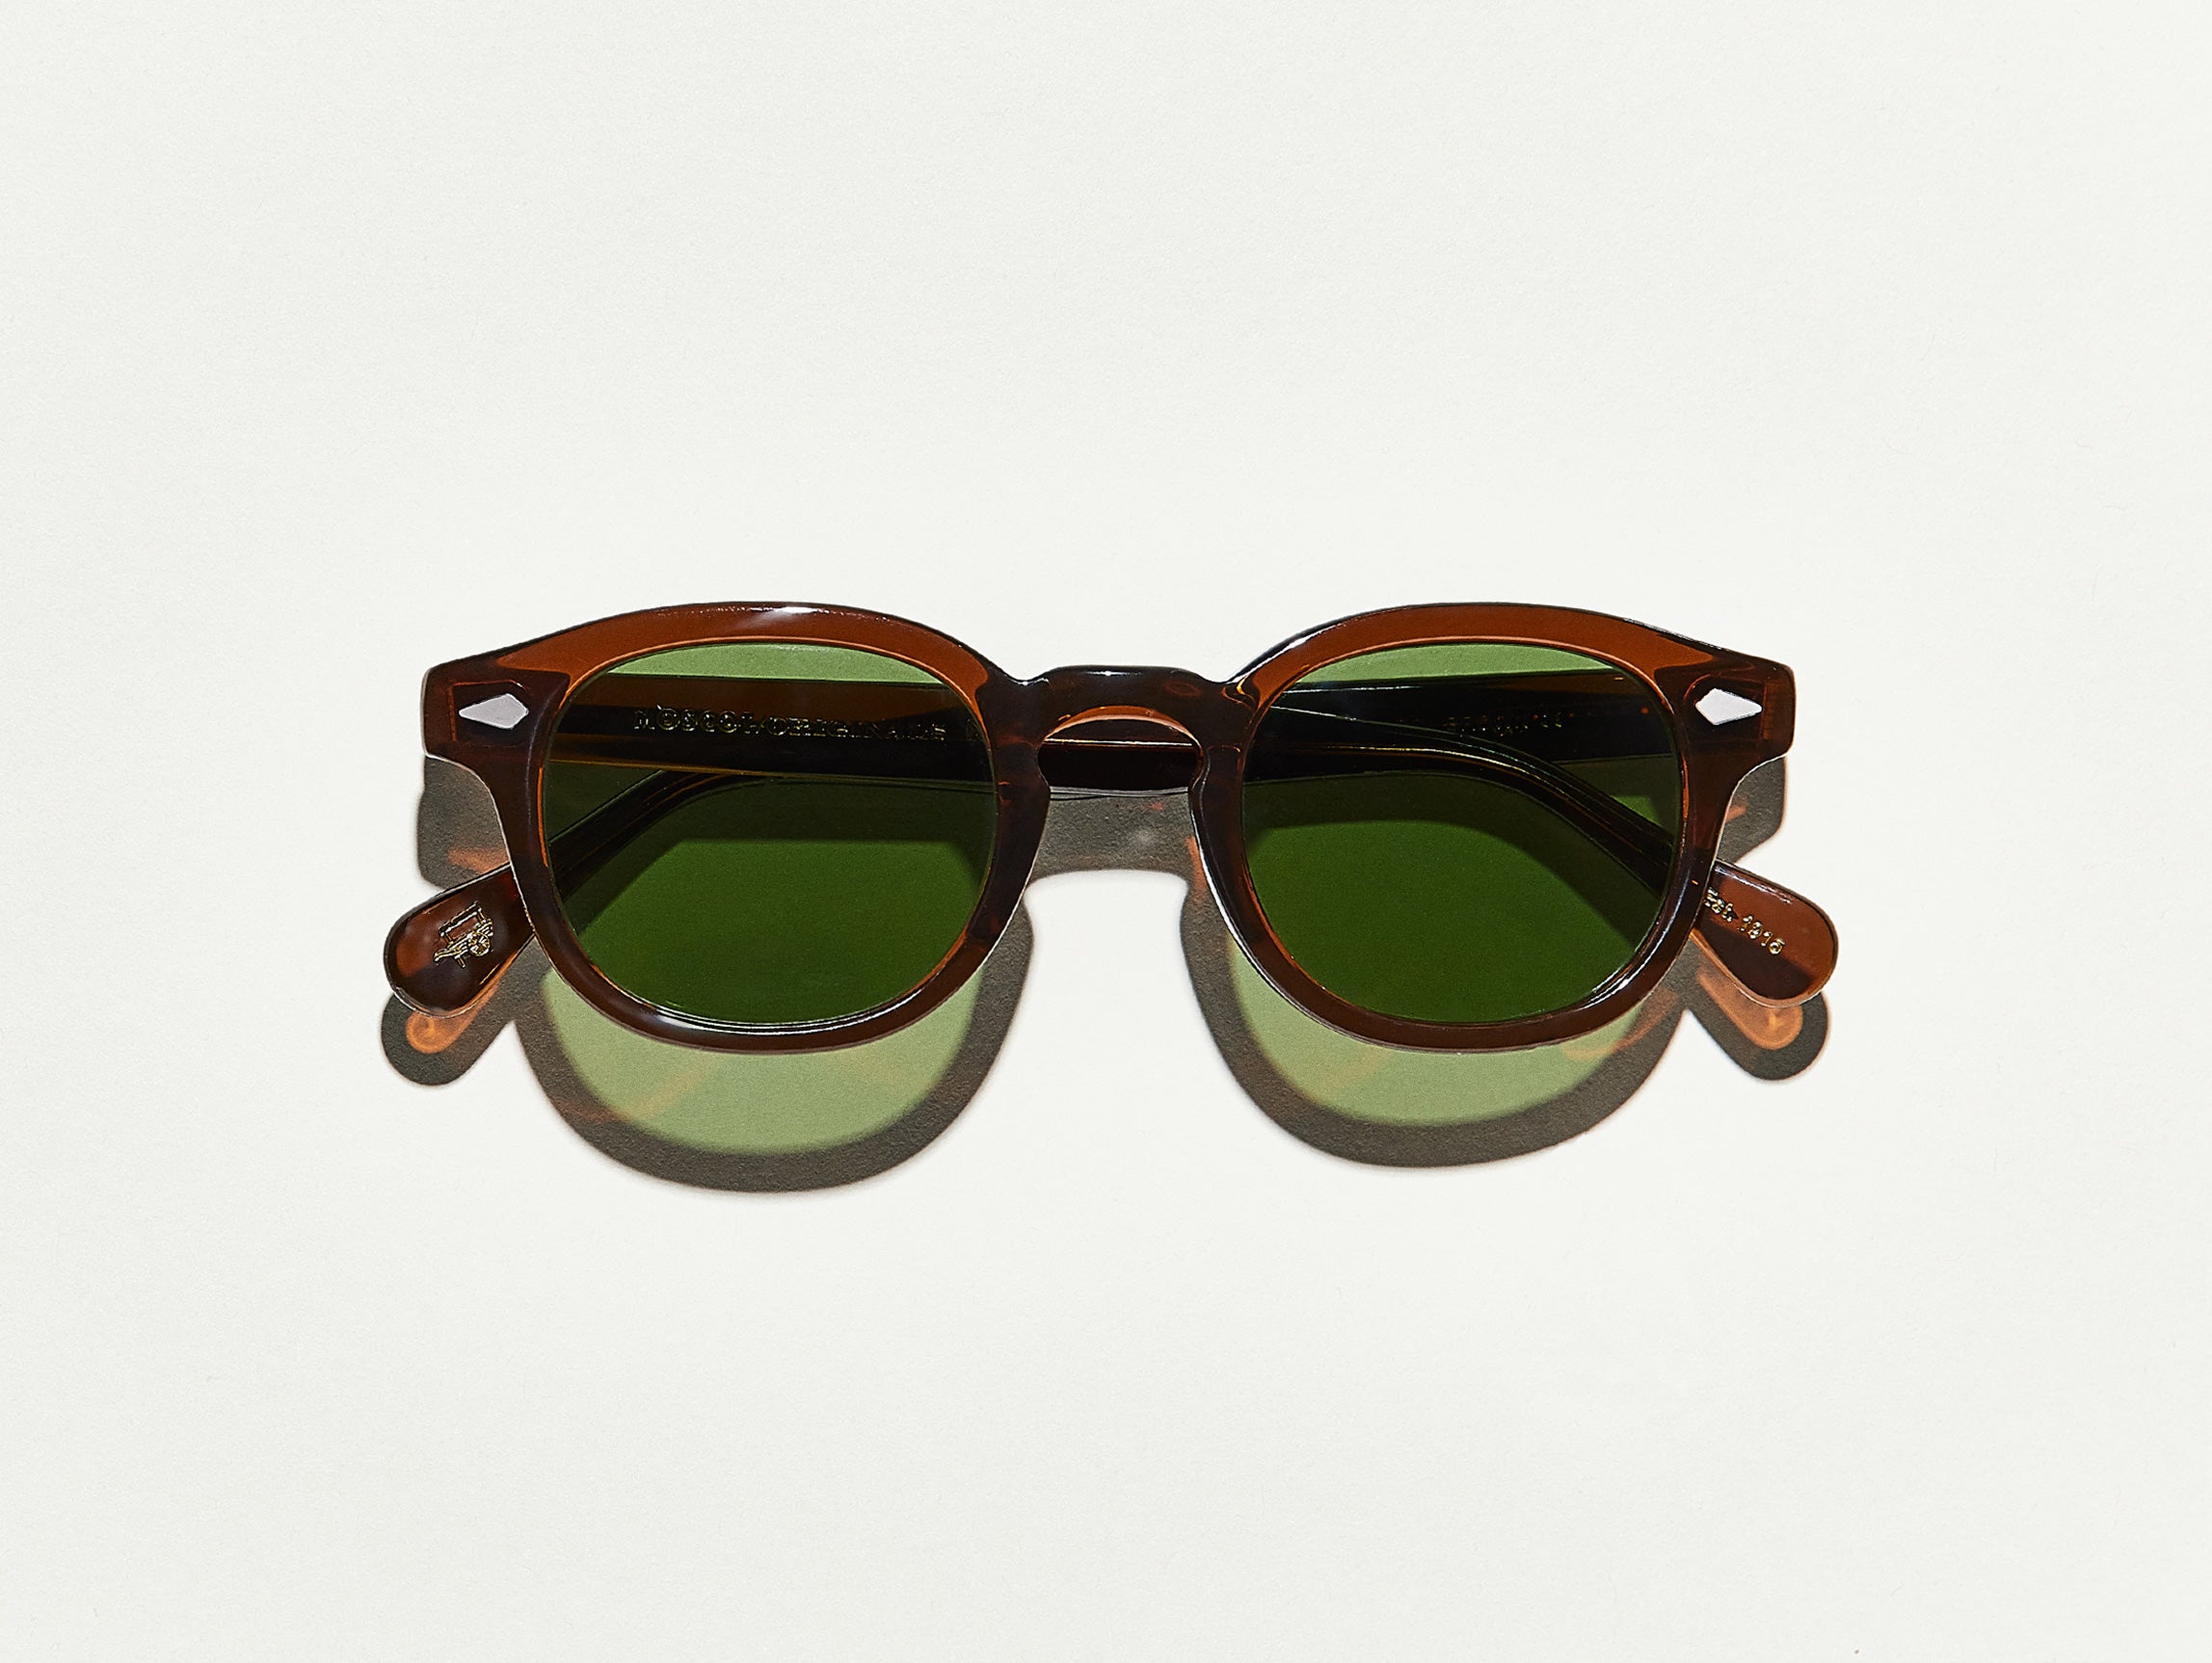 The LEMTOSH SUN in Brown with Calibar Green Glass Lenses